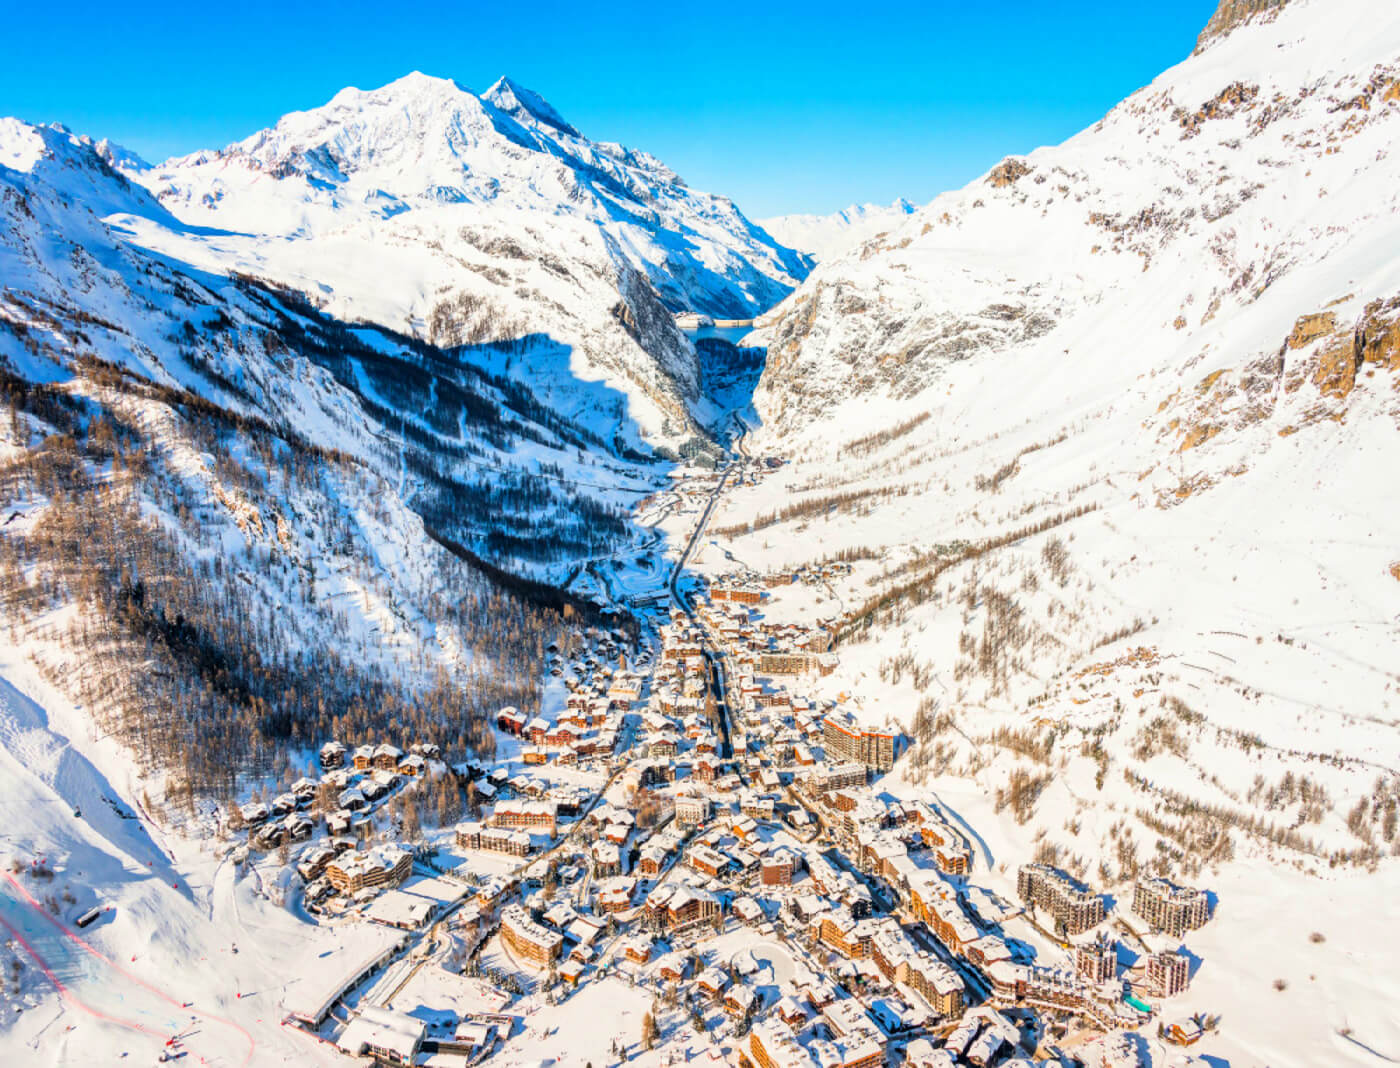 Val-d'Isère is one of the best places to ski in the world